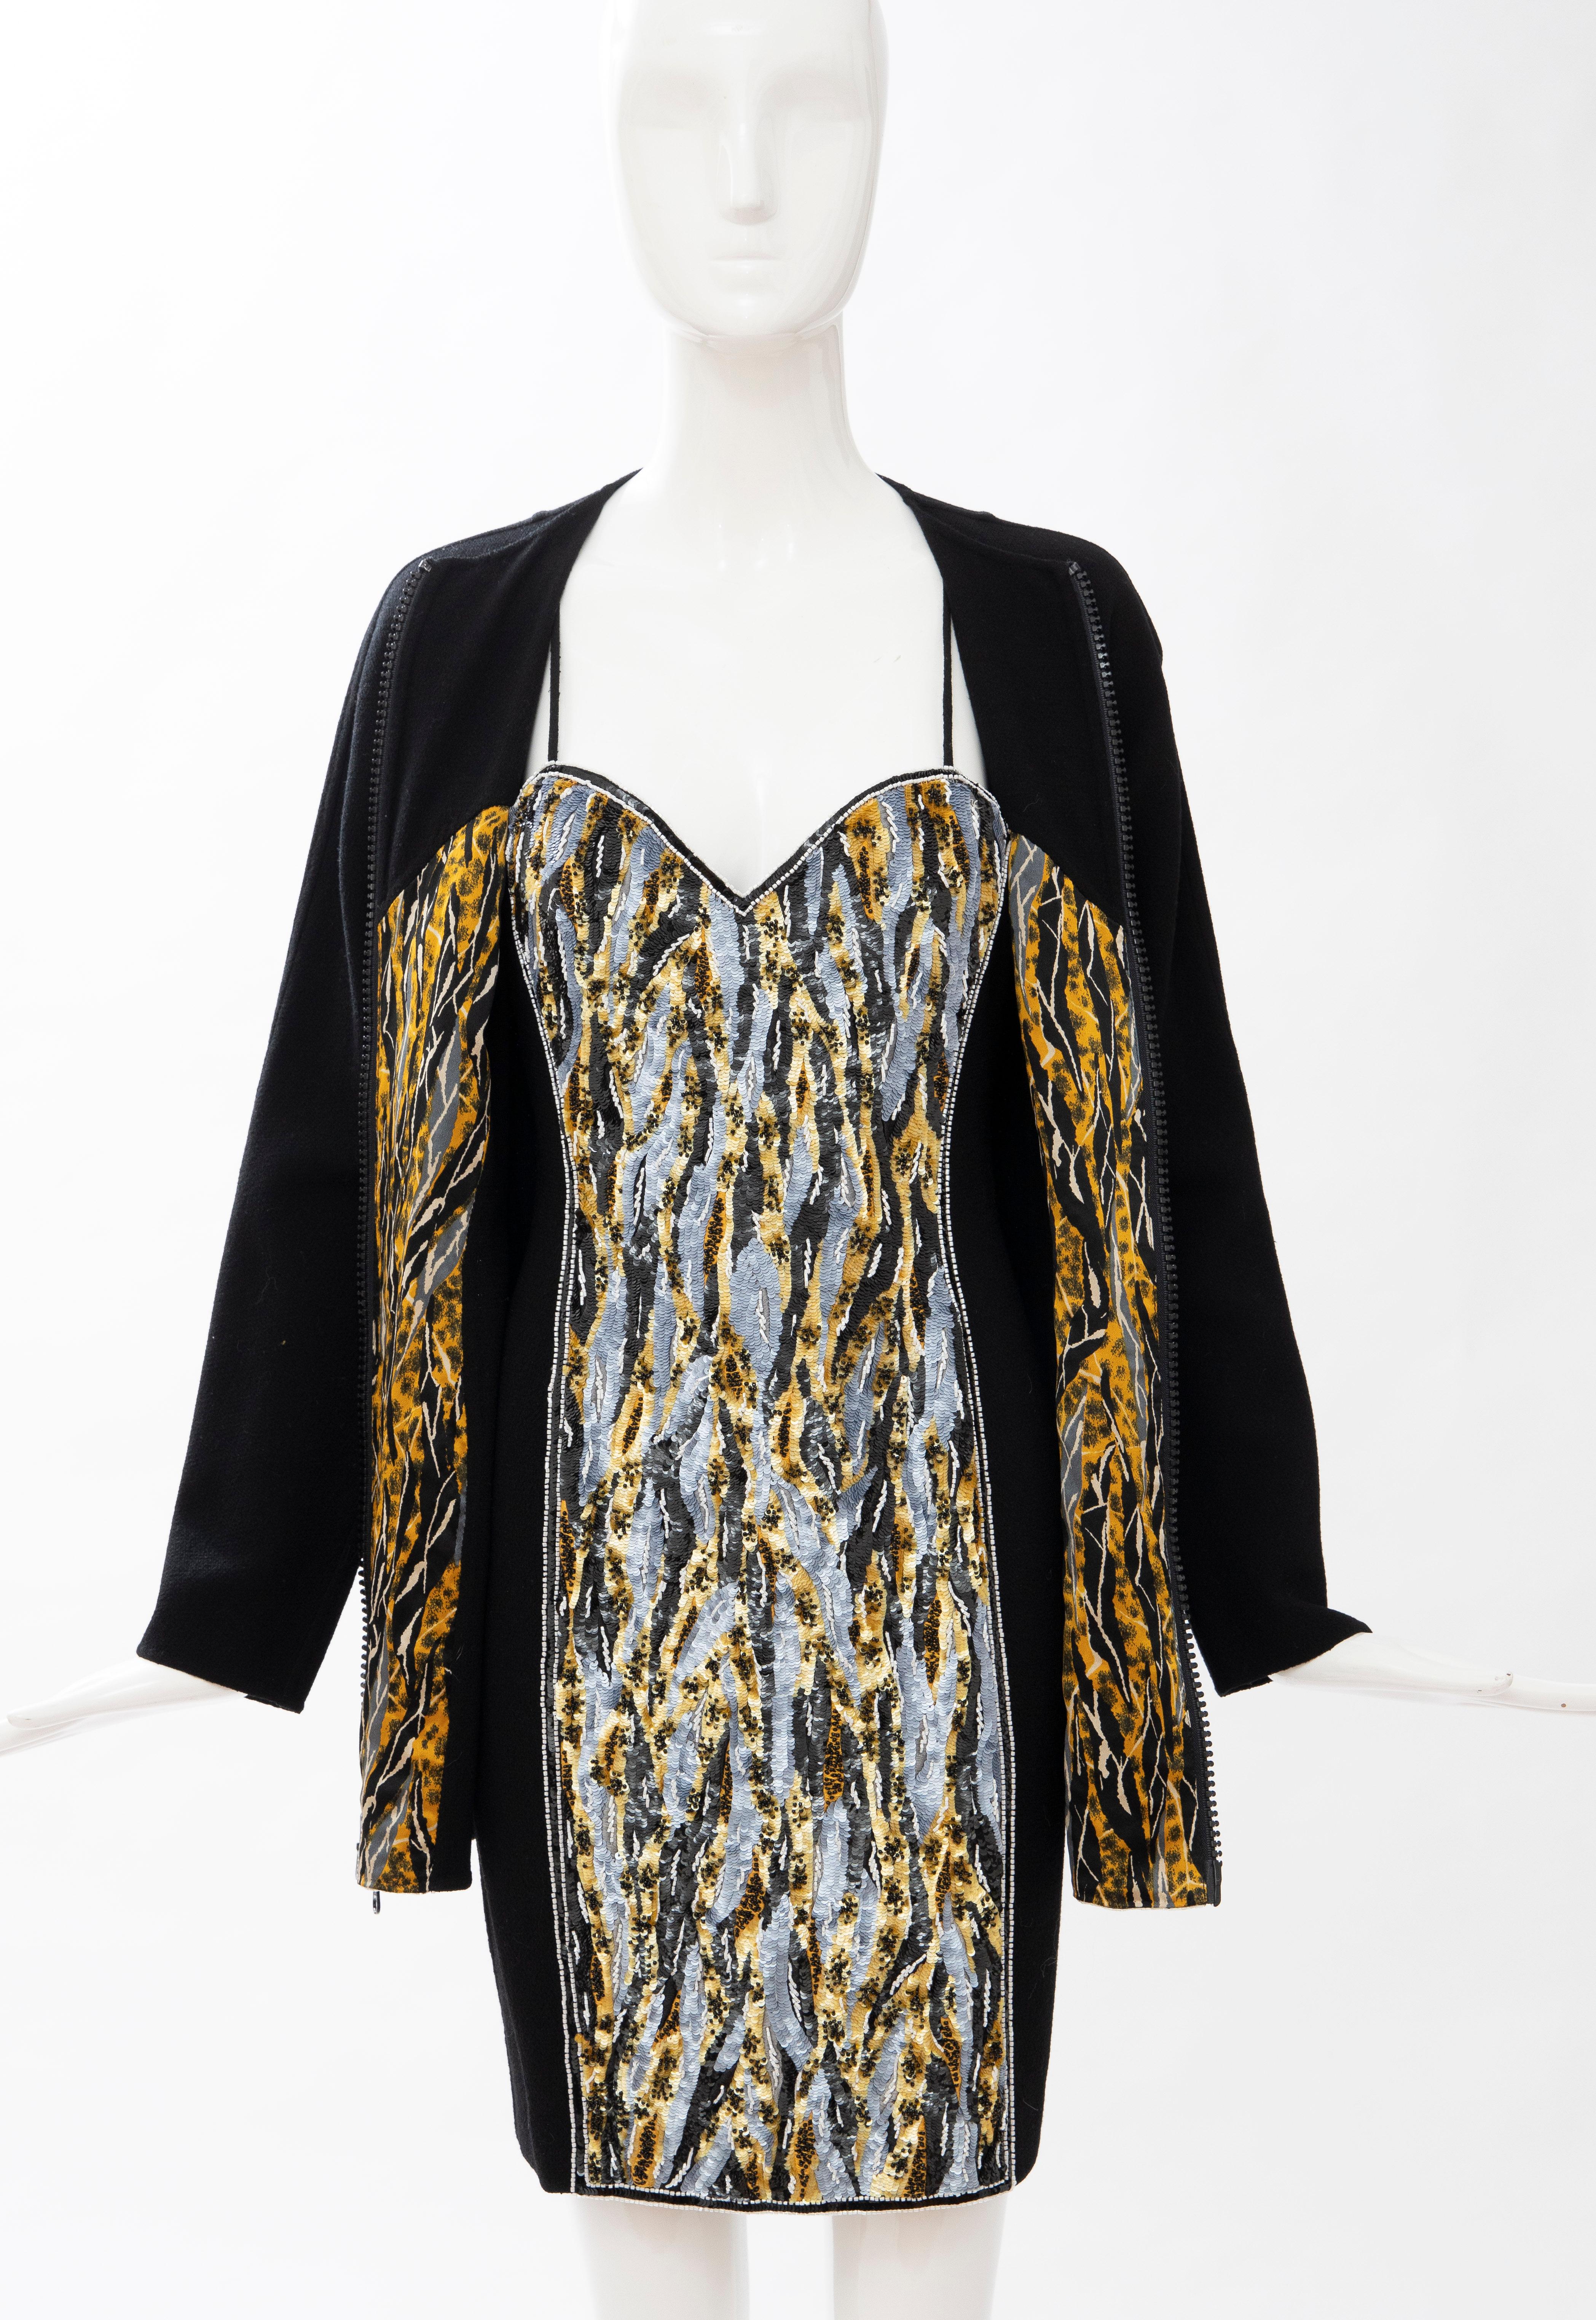 Geoffrey Beene Black Wool Crepe Embroidered Sequins Dress Ensemble, Circa 1990's For Sale 10